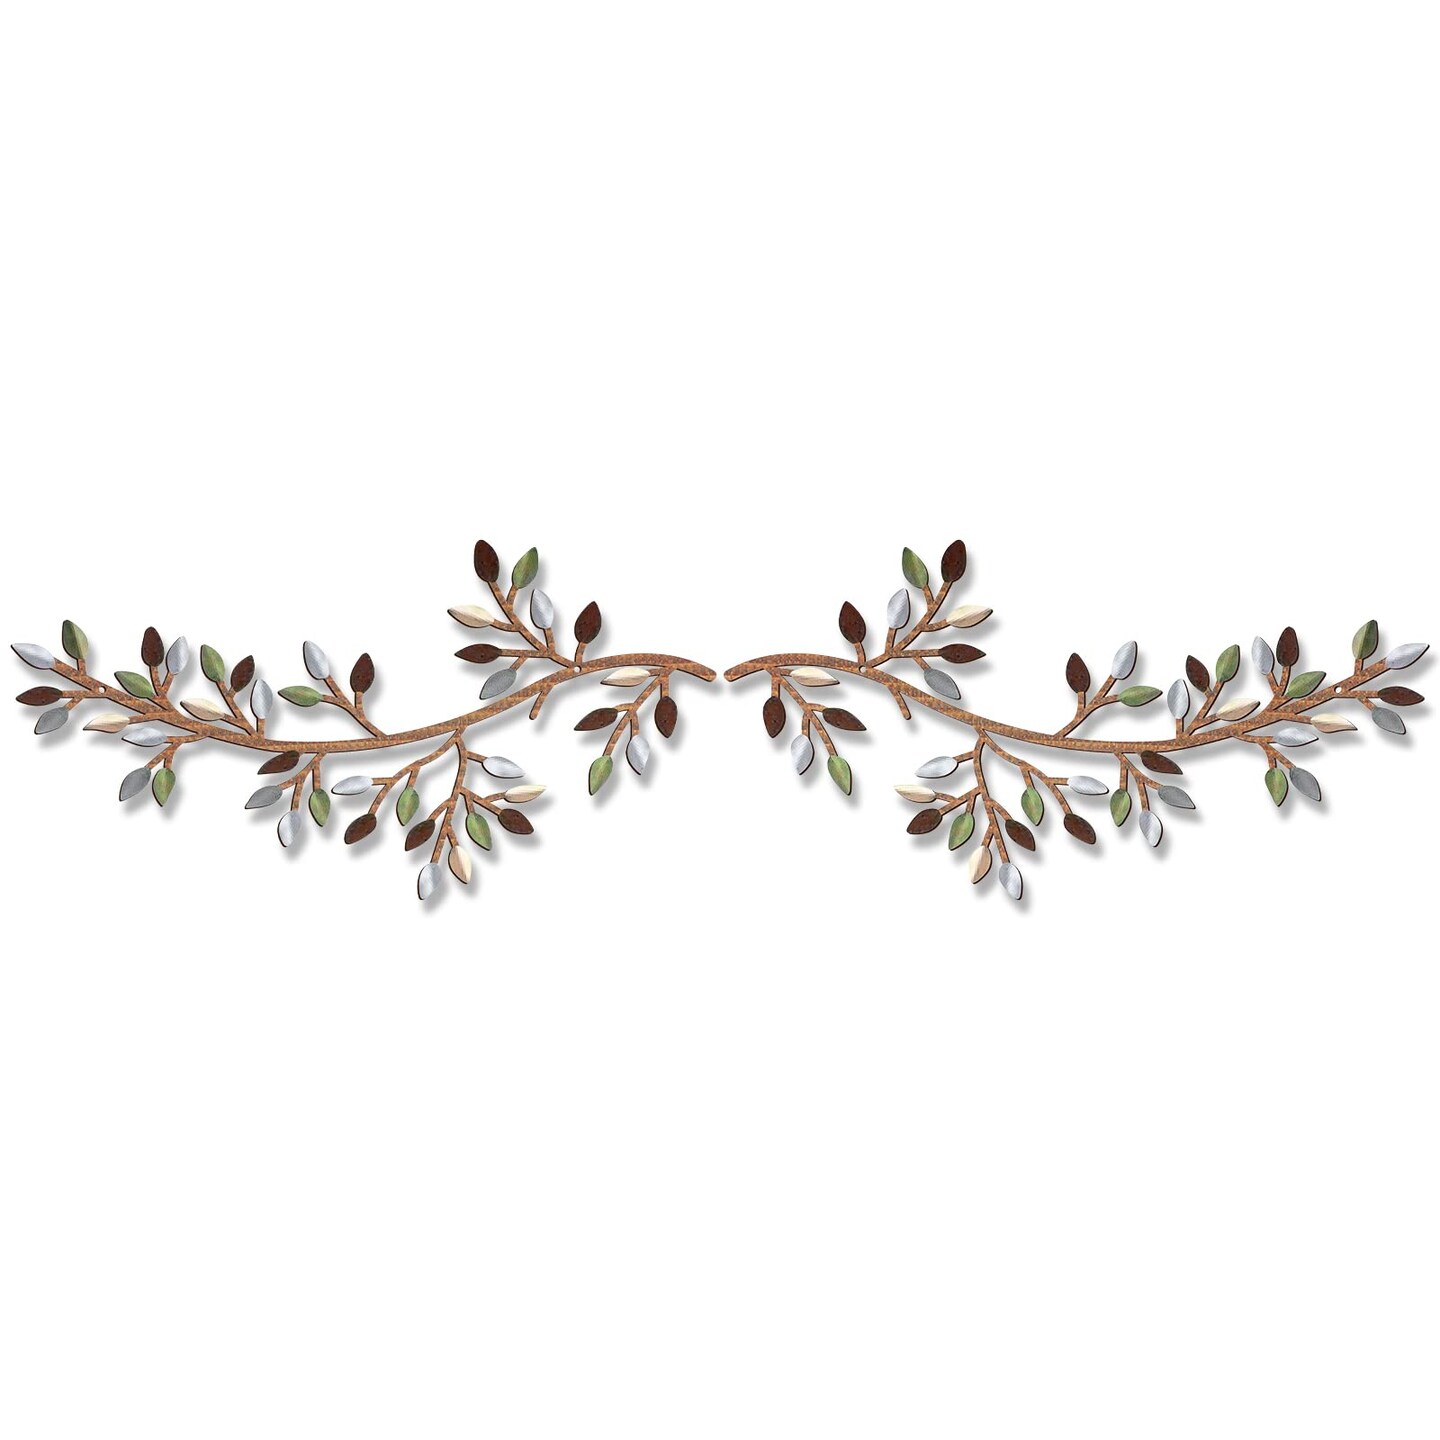 Hotop 2 Pieces Metal Tree Leaf Wall Decor Vine Olive Branch Wall Art Wrought Iron Scroll Sculptures Above the Bed, Living Room, Outdoor Decoration Multicolor